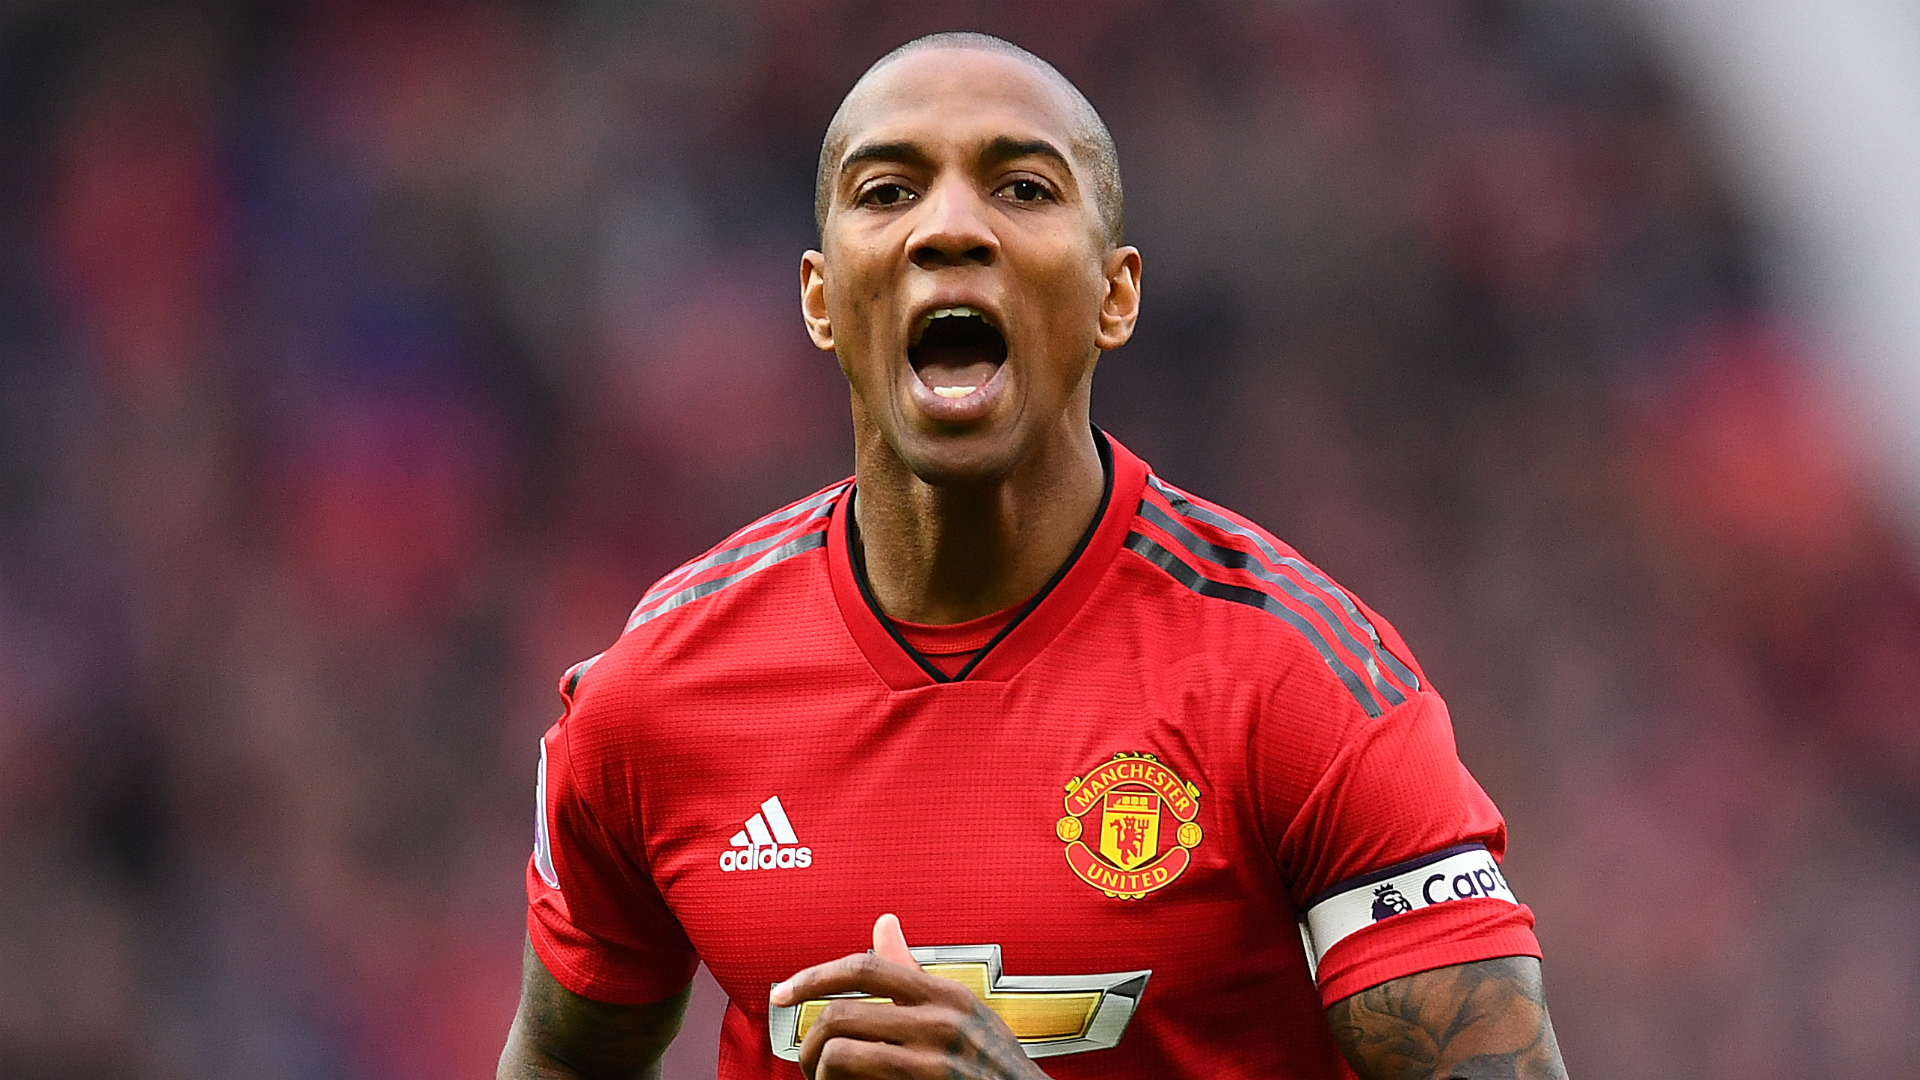 Manchester United will not be short of motivation for a derby clash with title-chasing Manchester City, says Ashley Young.